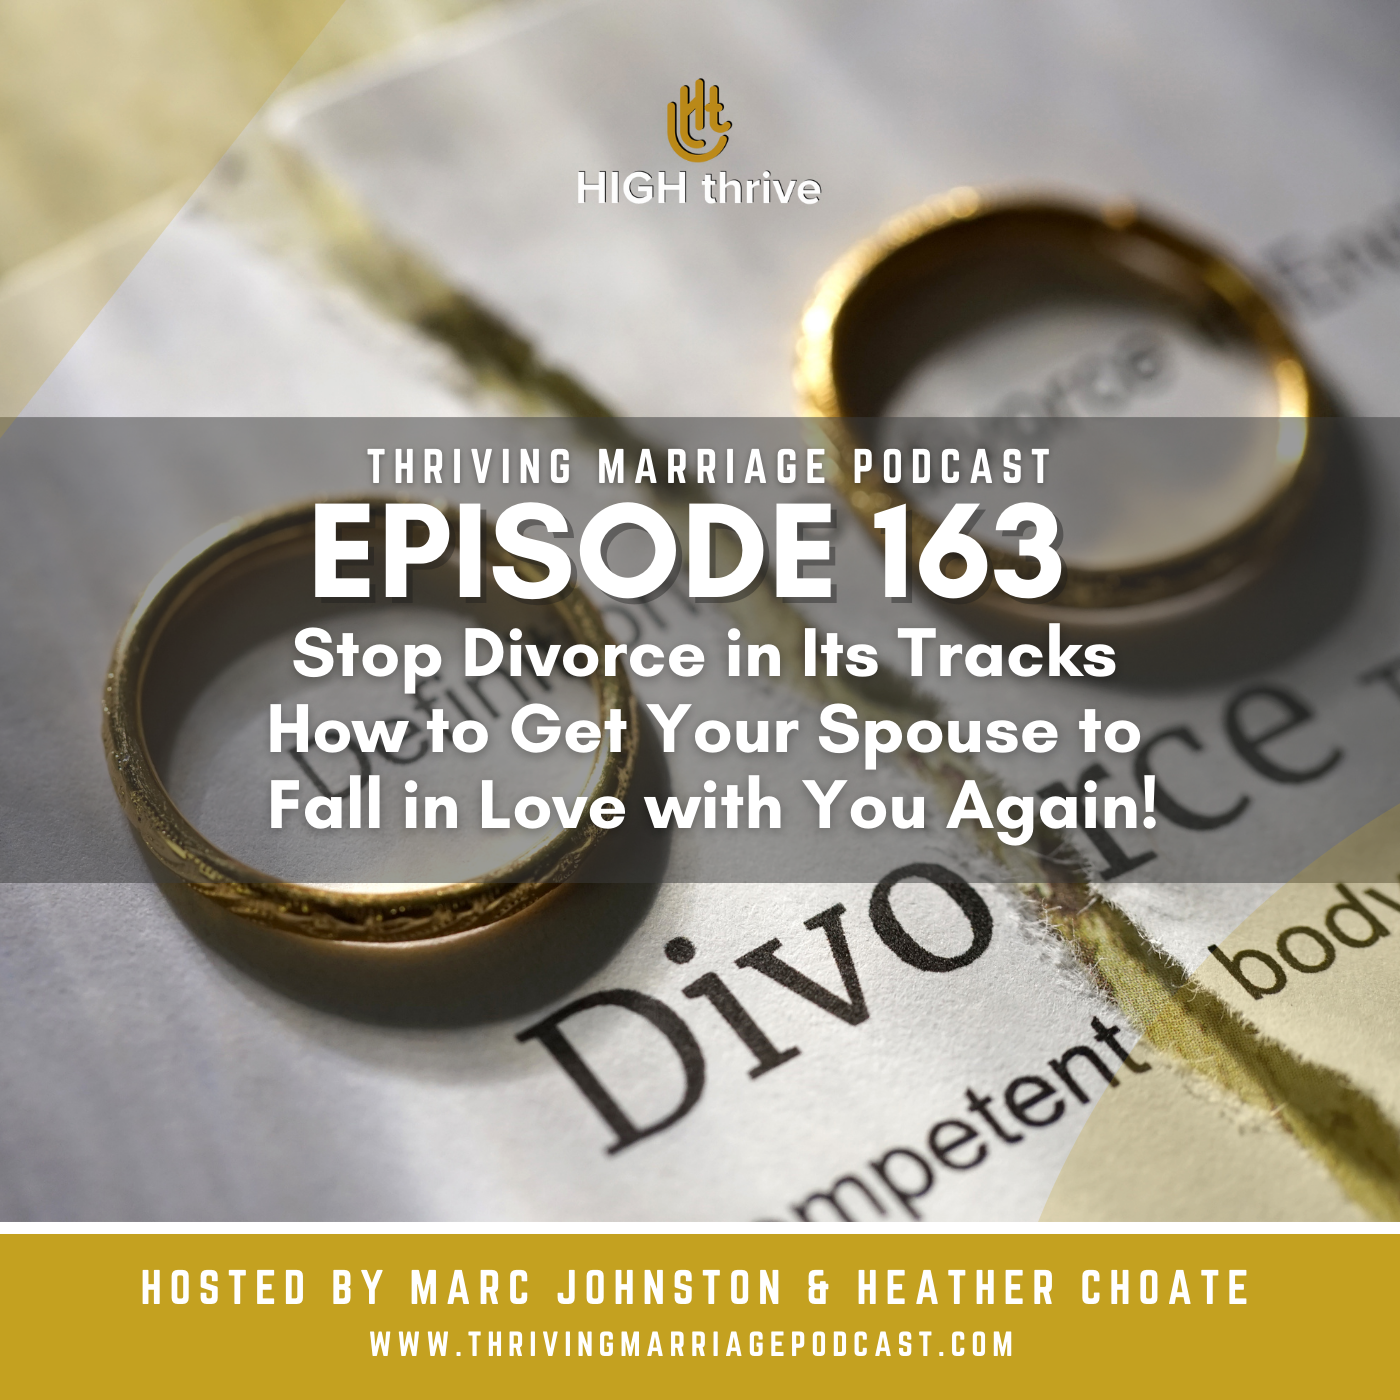 Episode 163: Stop Divorce in Its Tracks How to Get Your Spouse to Fall in Love with You Again!